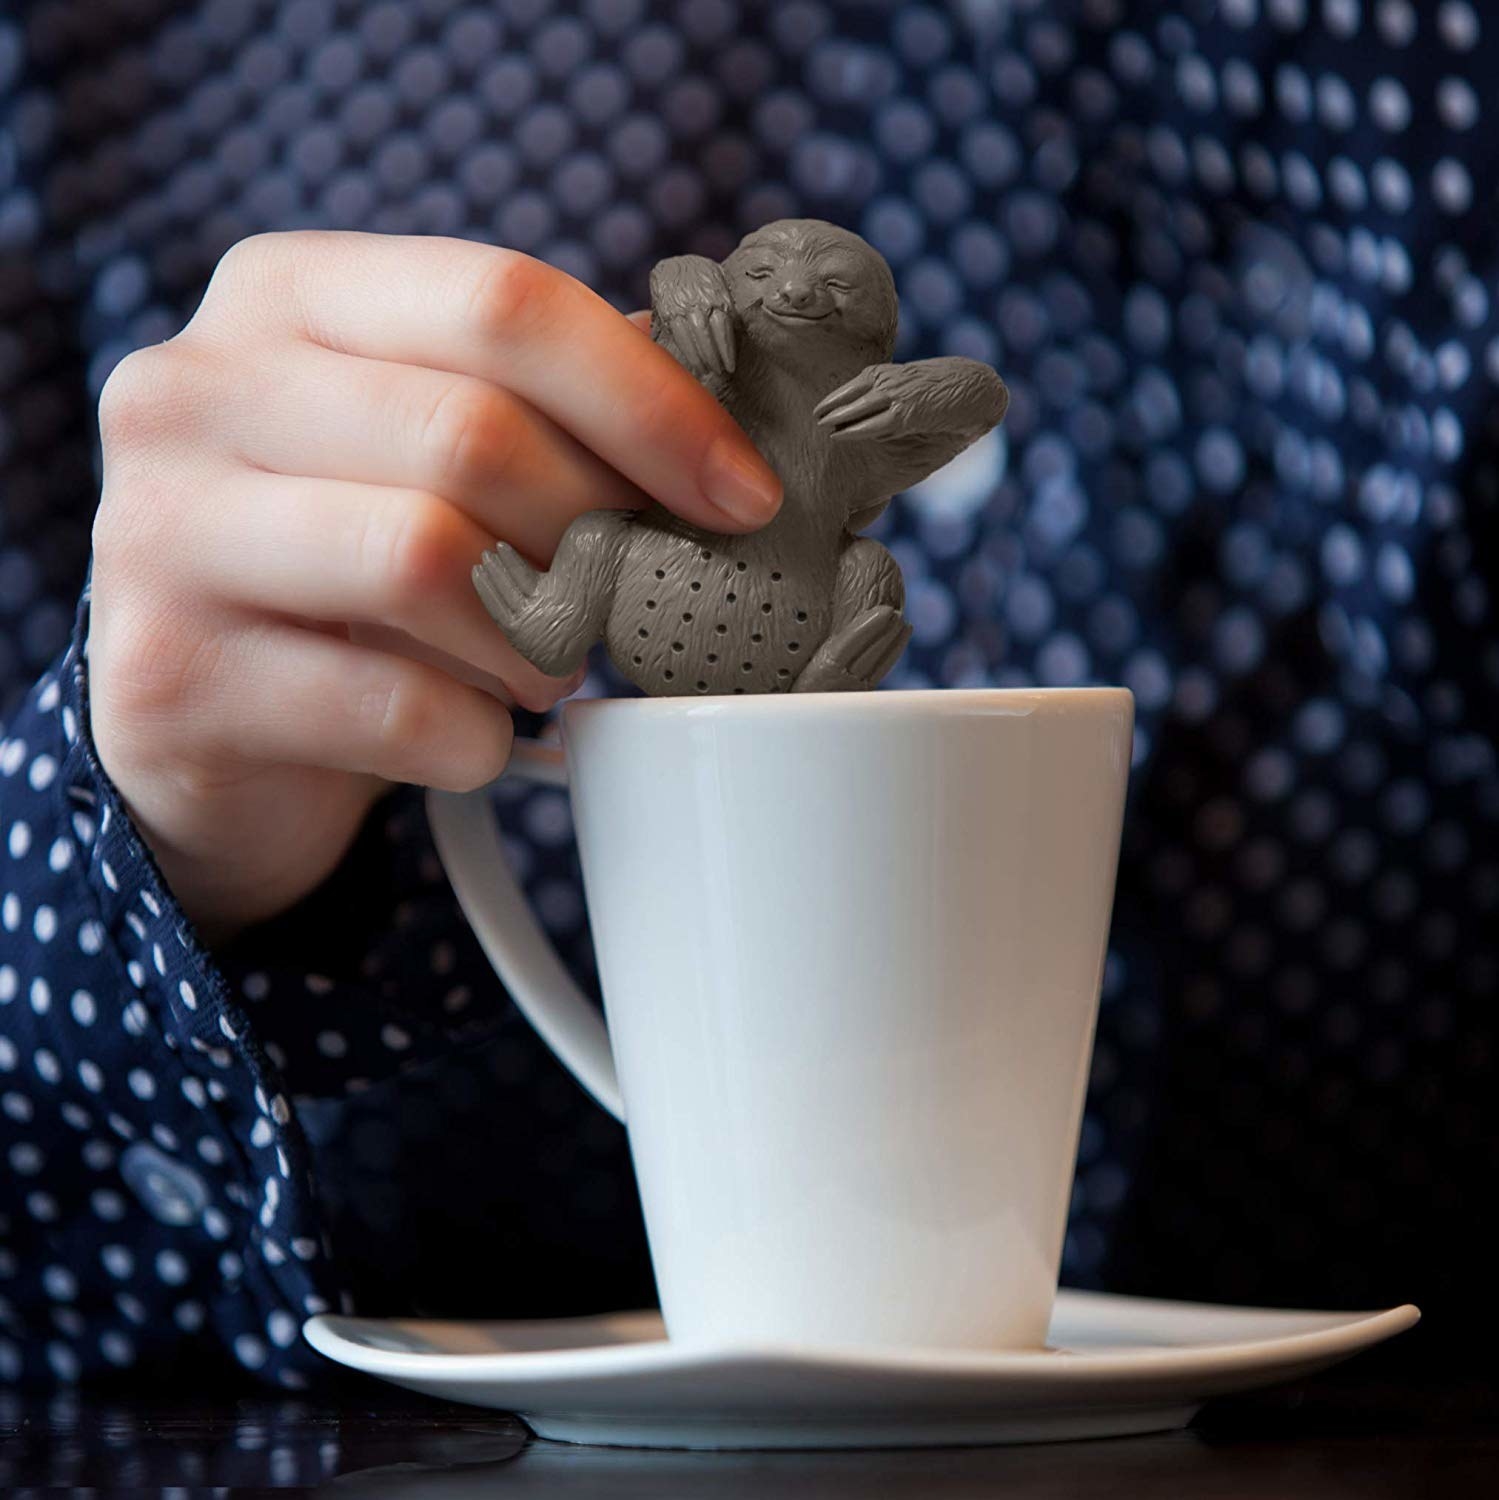 A person dipping the sloth infuser into a mug of tea